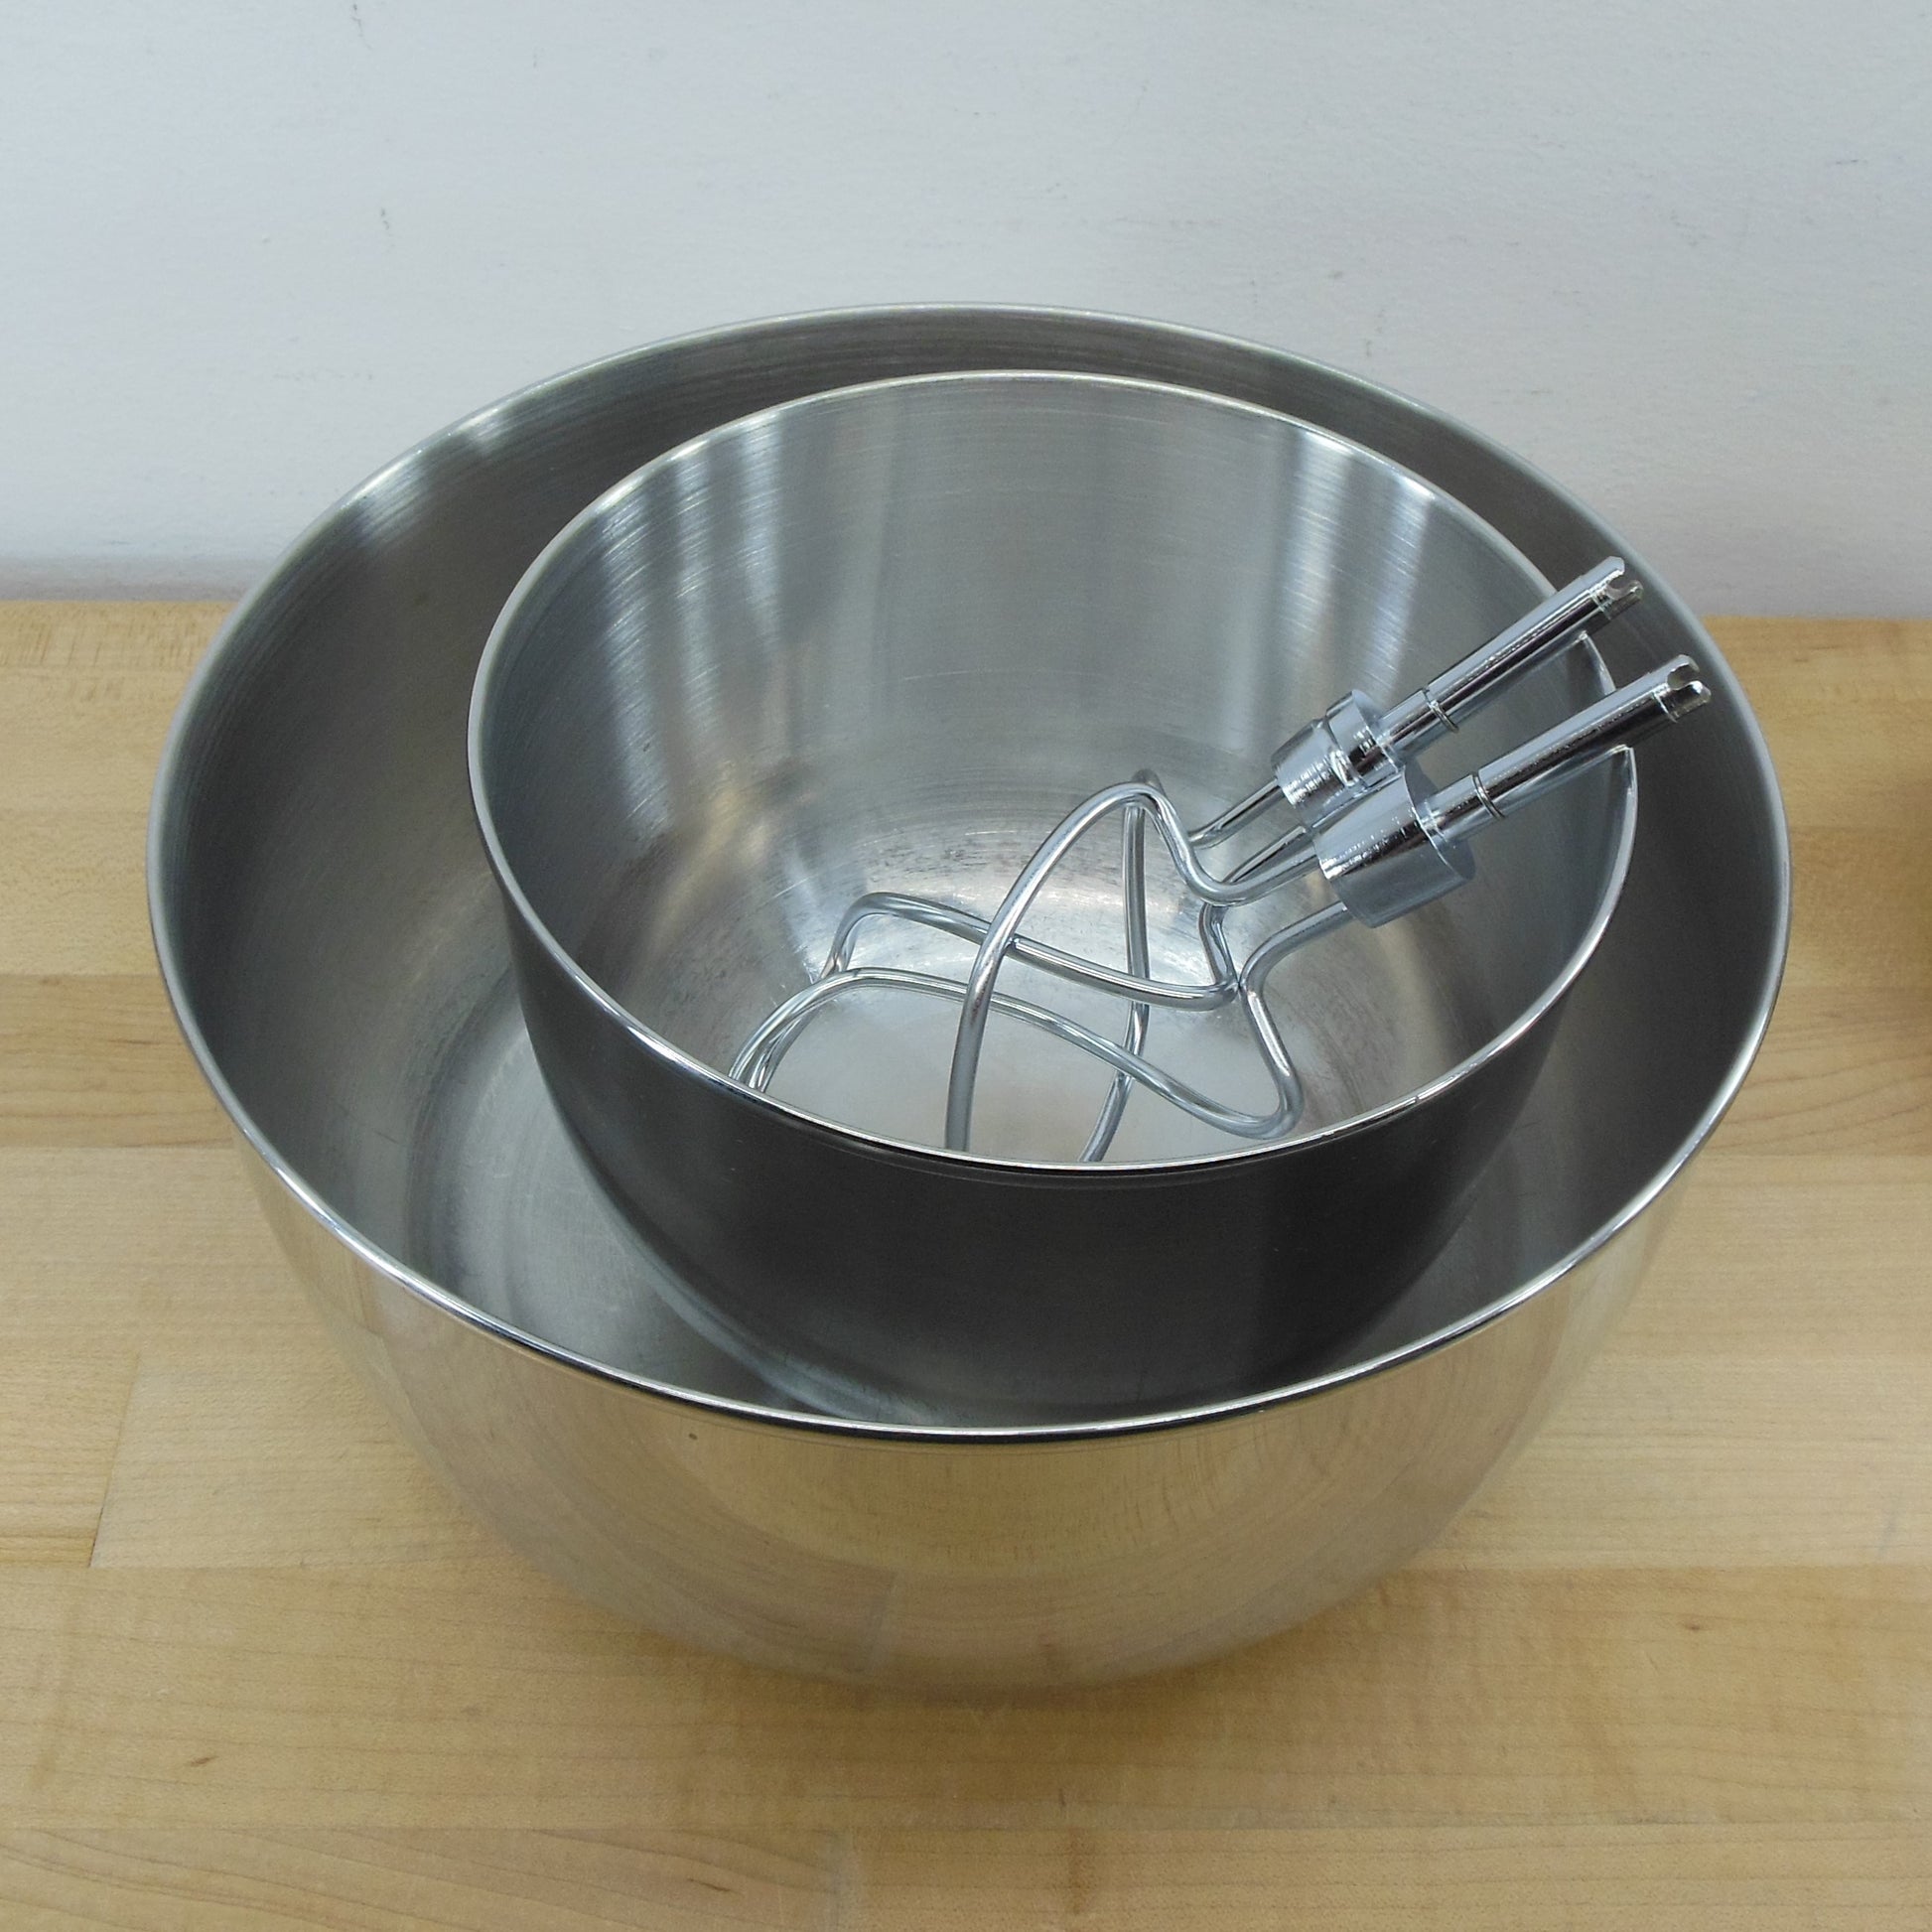  Replacement Large Stainless Steel Bowl fits Sunbeam & Oster  Mixers: Home & Kitchen